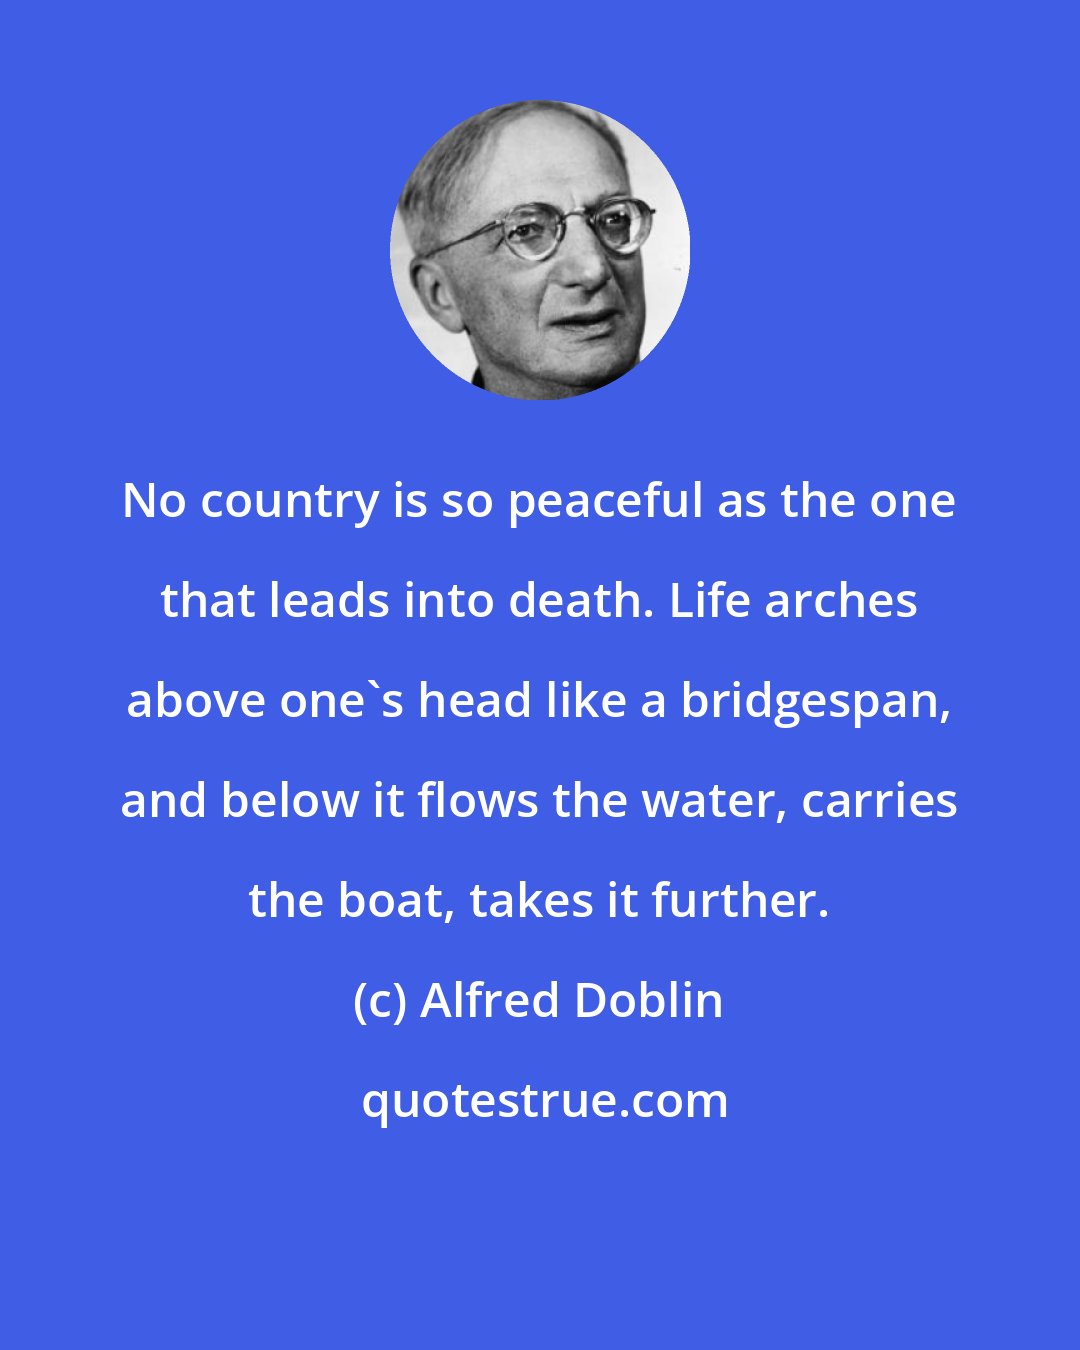 Alfred Doblin: No country is so peaceful as the one that leads into death. Life arches above one's head like a bridgespan, and below it flows the water, carries the boat, takes it further.